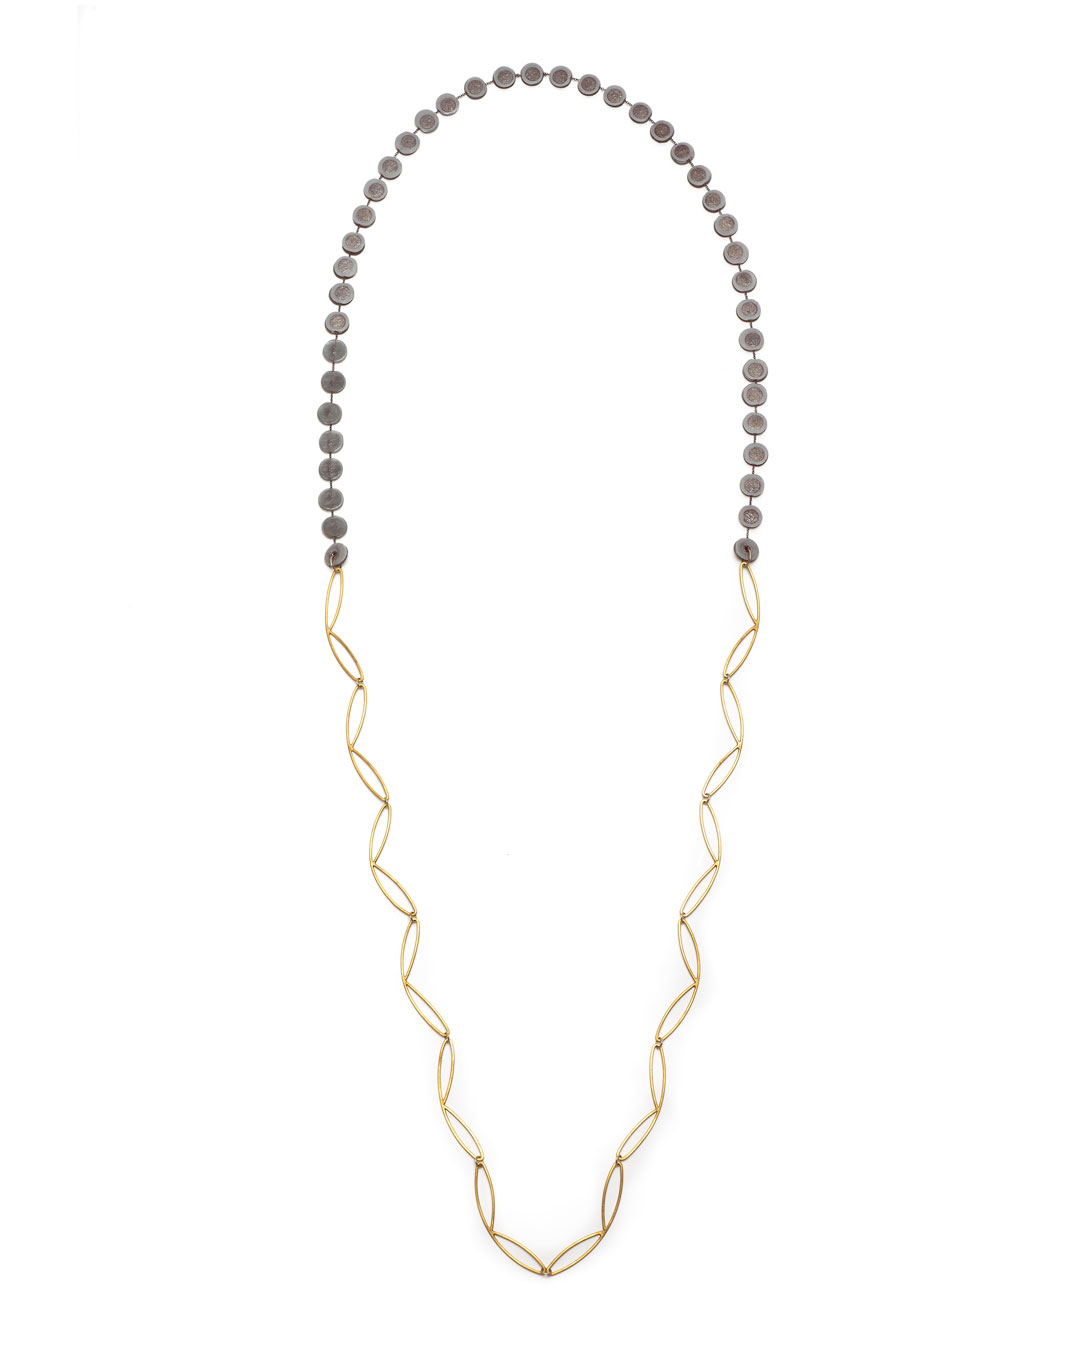 Karola Torkos, untitled, 2020, necklace; gold-plated copper, 14ct gold, oxidised silver, plastic, L 1140 mm, €460